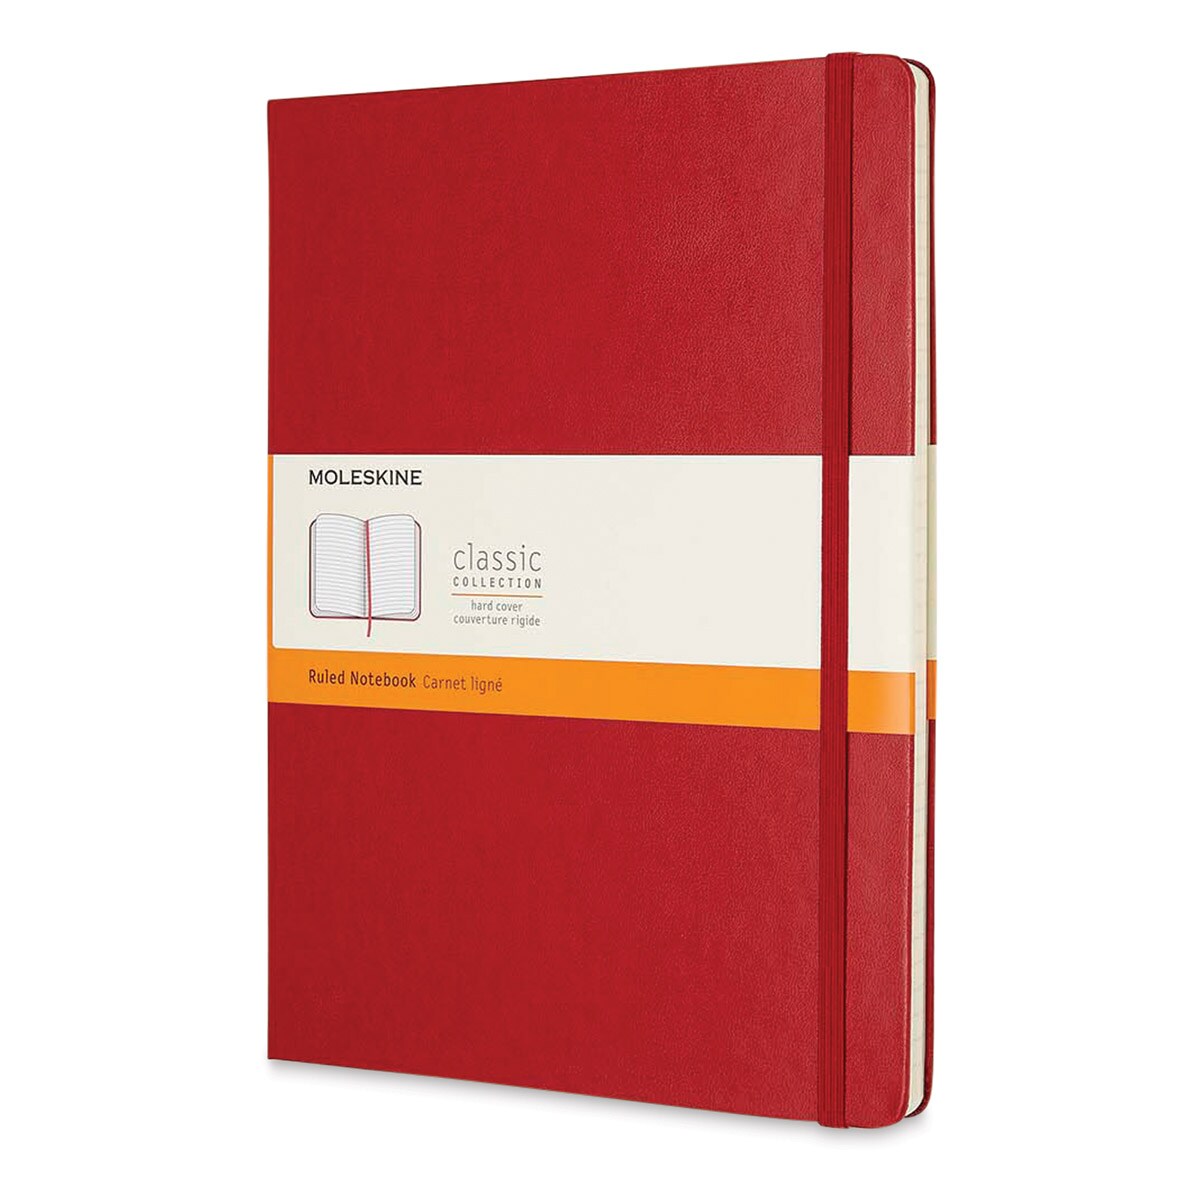 Moleskine Classic Hardcover Notebook - Scarlet Red, Ruled, 9-3/4